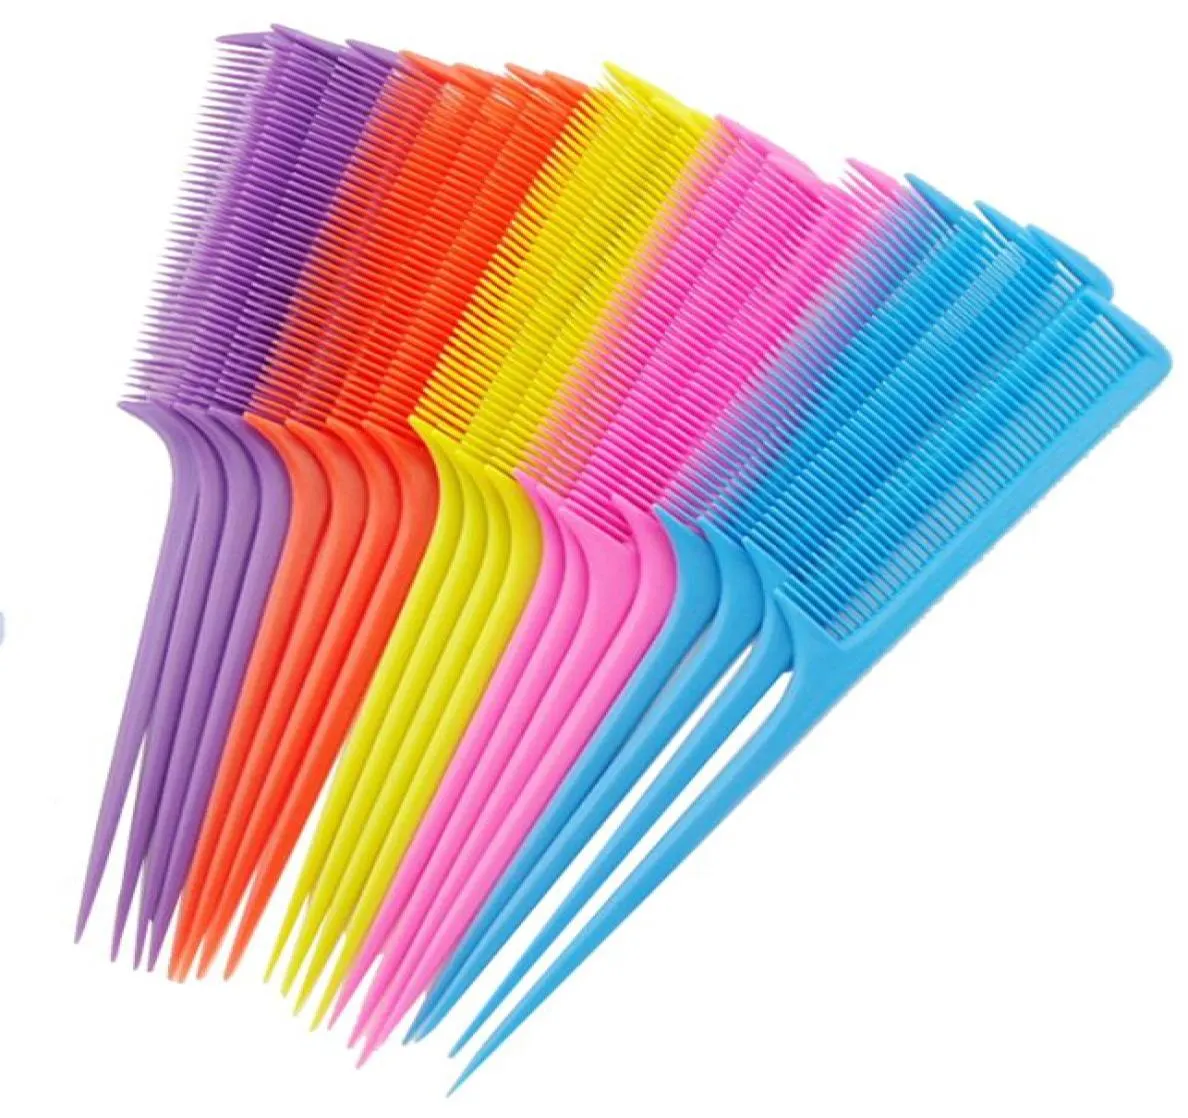 200 pcs Rat Tail Hairdressing Combs Tangled Straight Hair Brushes Girls Ponytail Comb Pro Salon Hair Care Styling Tools6501861